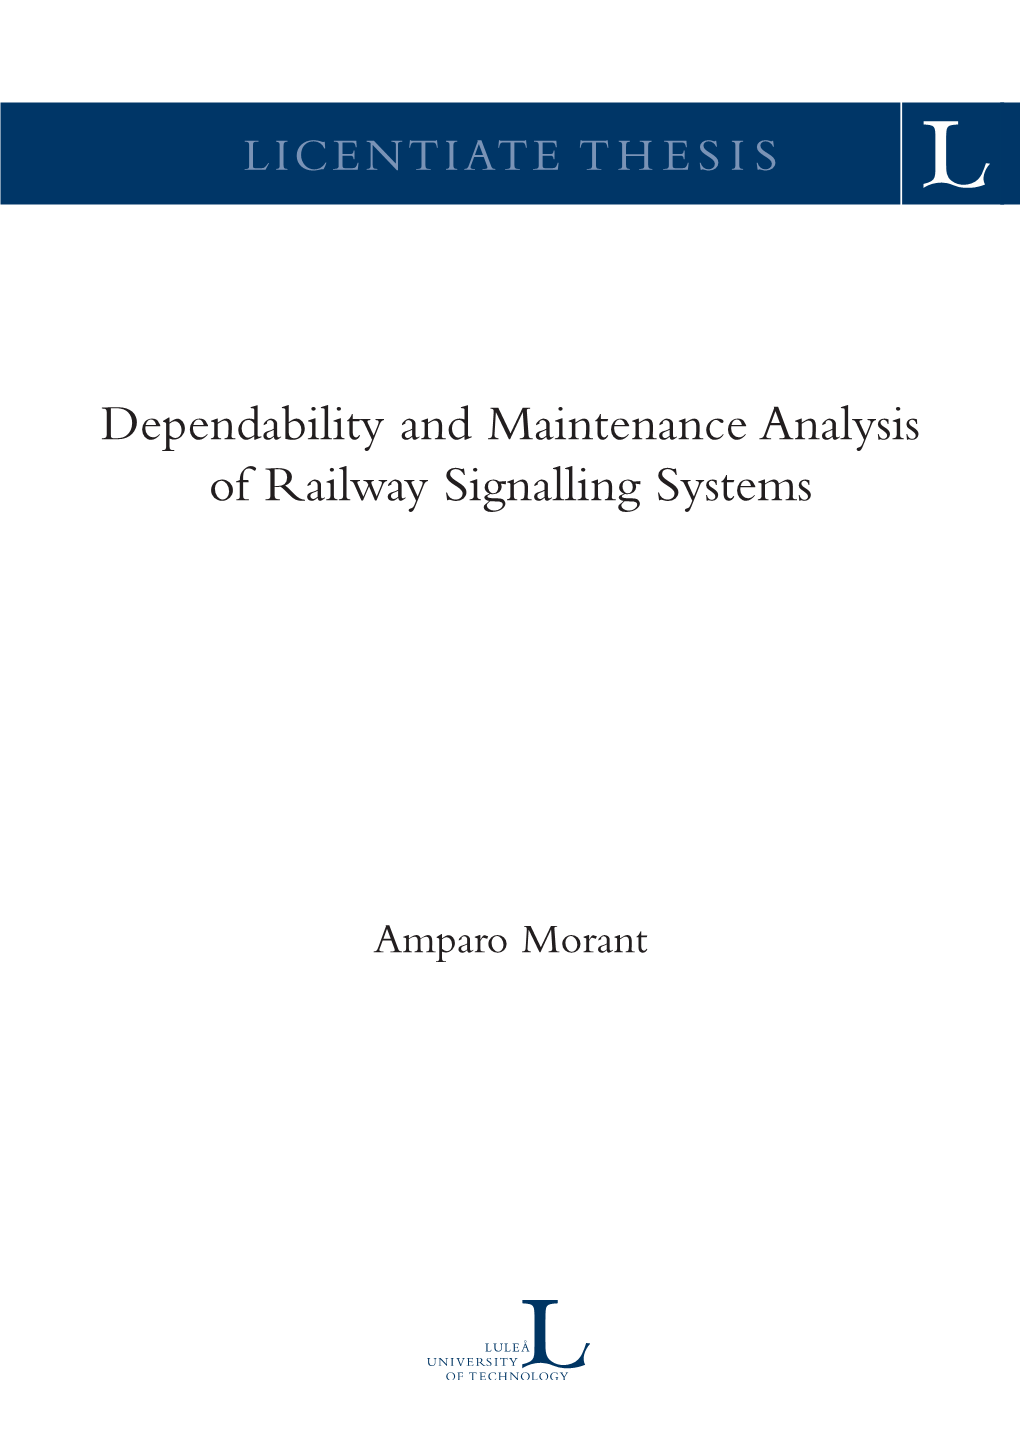 Dependability and Maintenance Analysis of Railway Signalling Systems